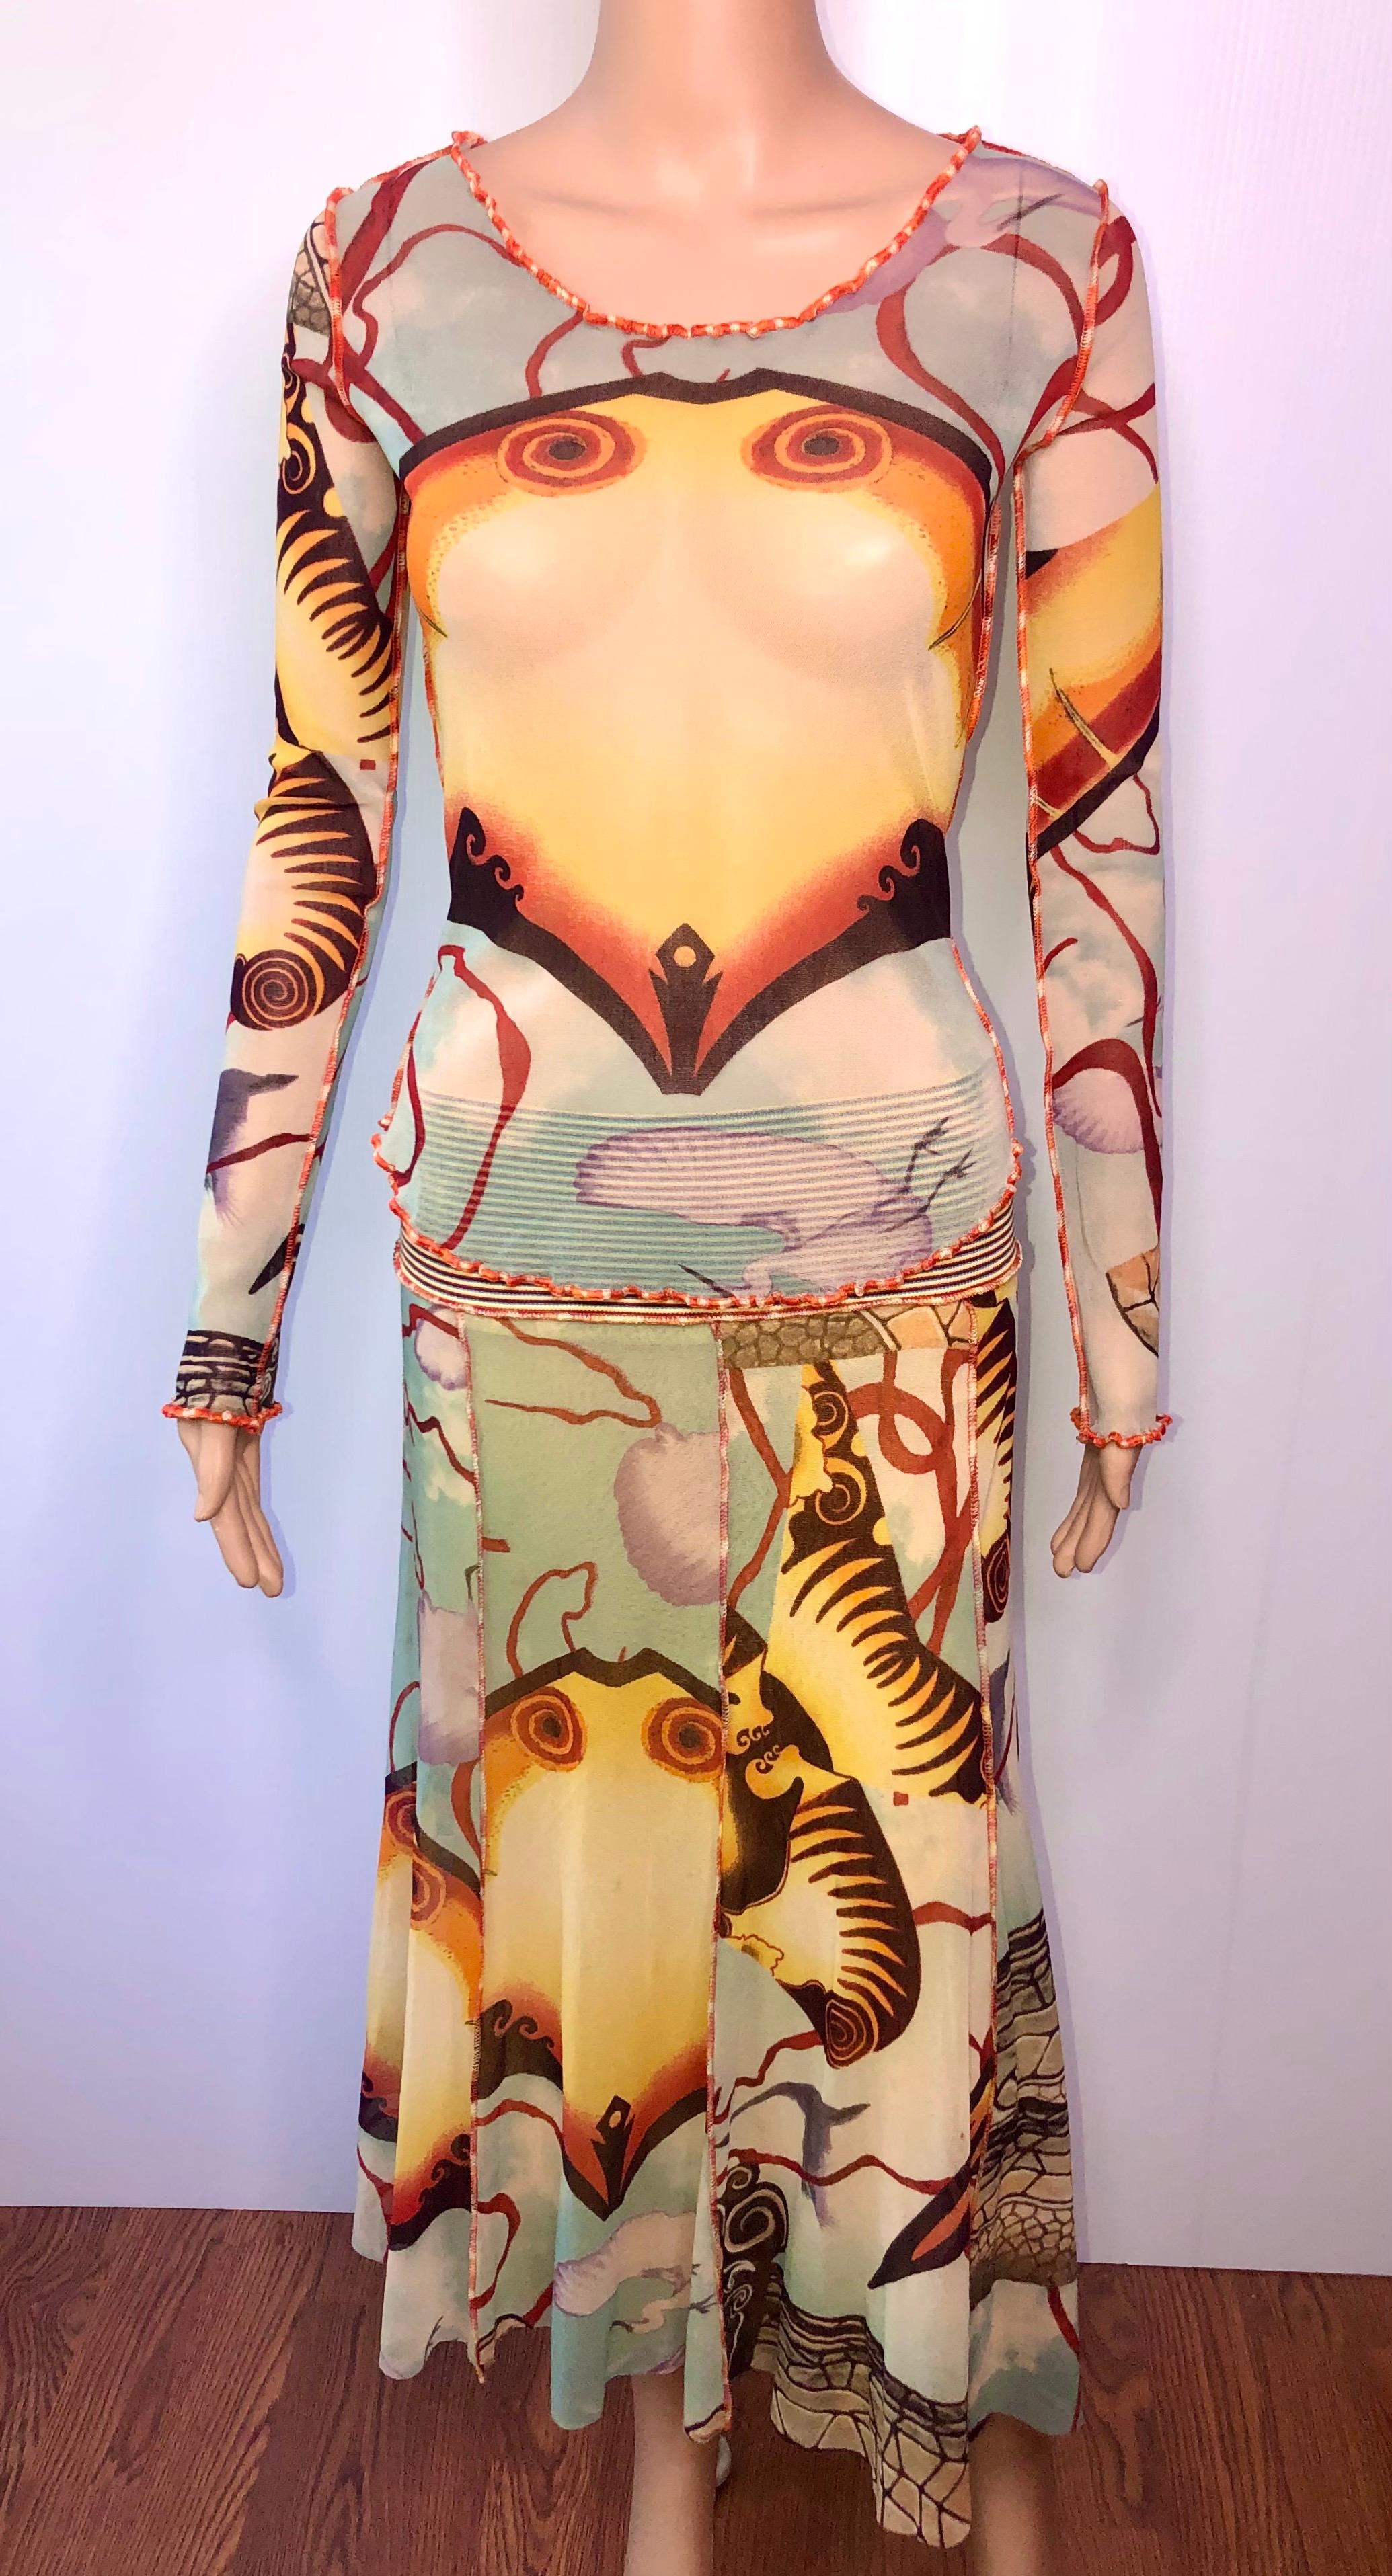 Jean Paul Gaultier S/S 2005 Mesh Abstract Salvador Dali Top & Skirt 2 Piece Set  In Good Condition For Sale In Naples, FL